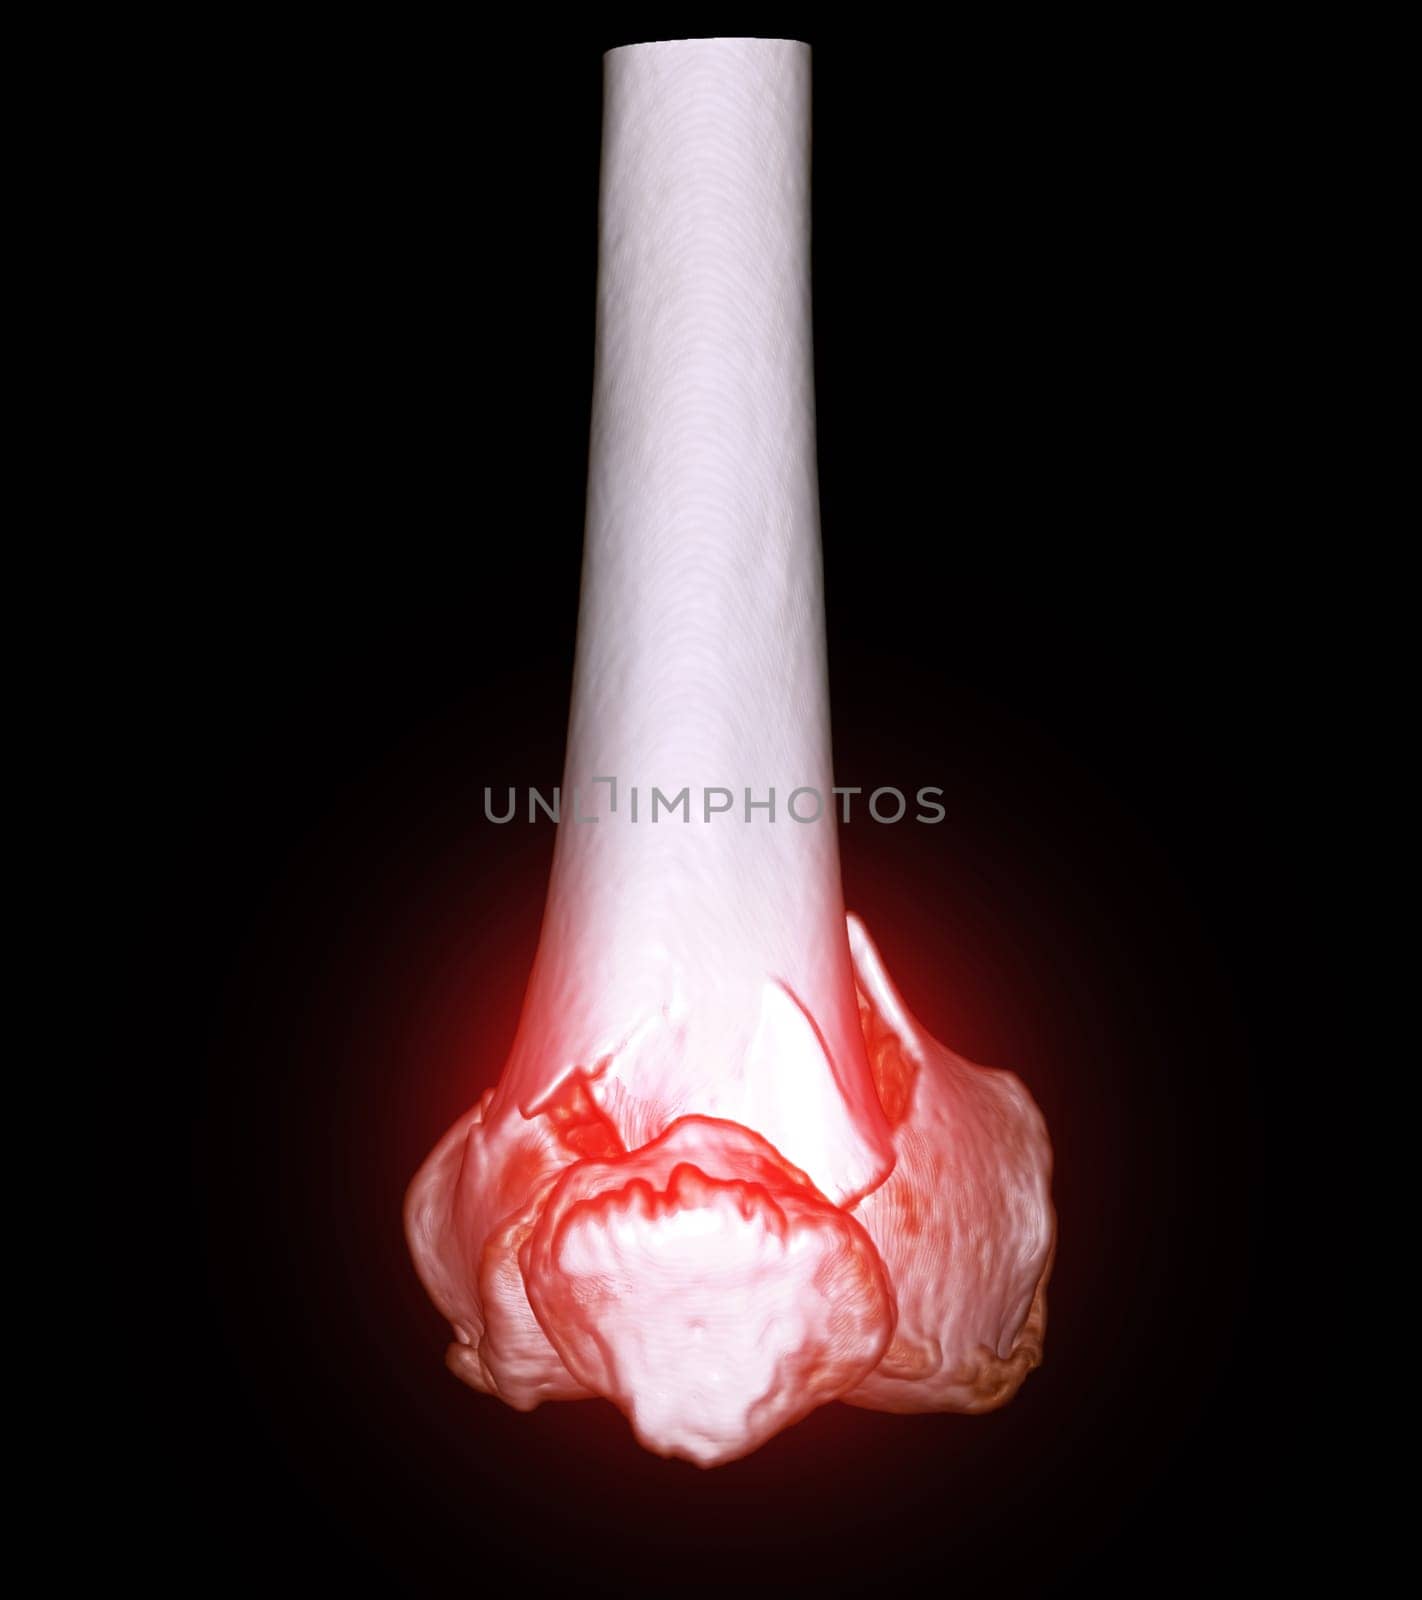 CT scan of knee joint 3D rendering image  showing fracture of distal femur bone. by samunella